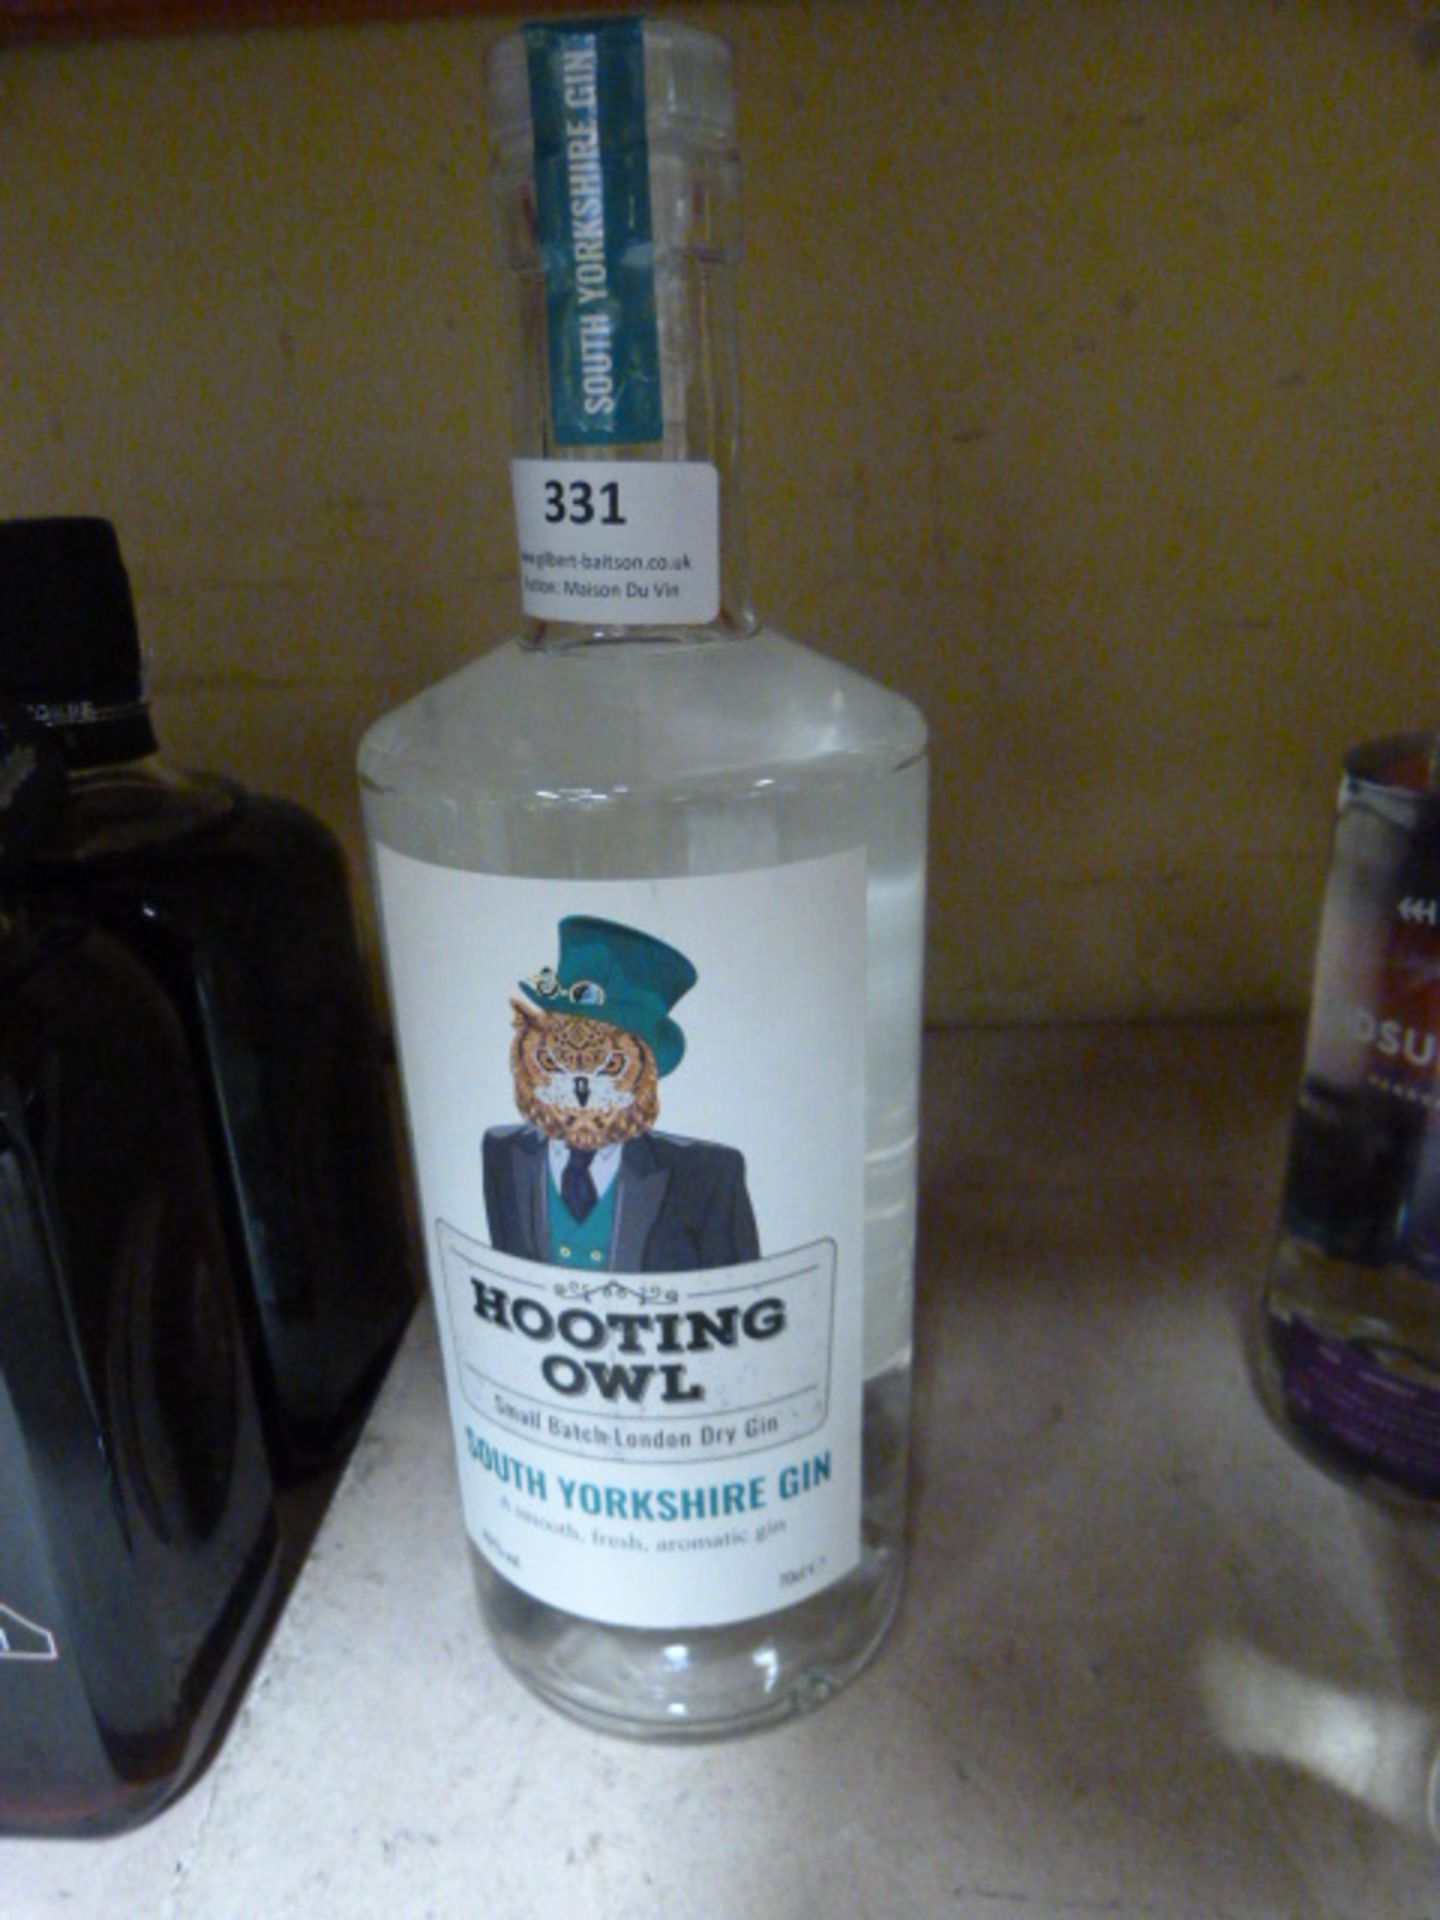 *70cl Bottle of Hooting Owl South Yorkshire Gin